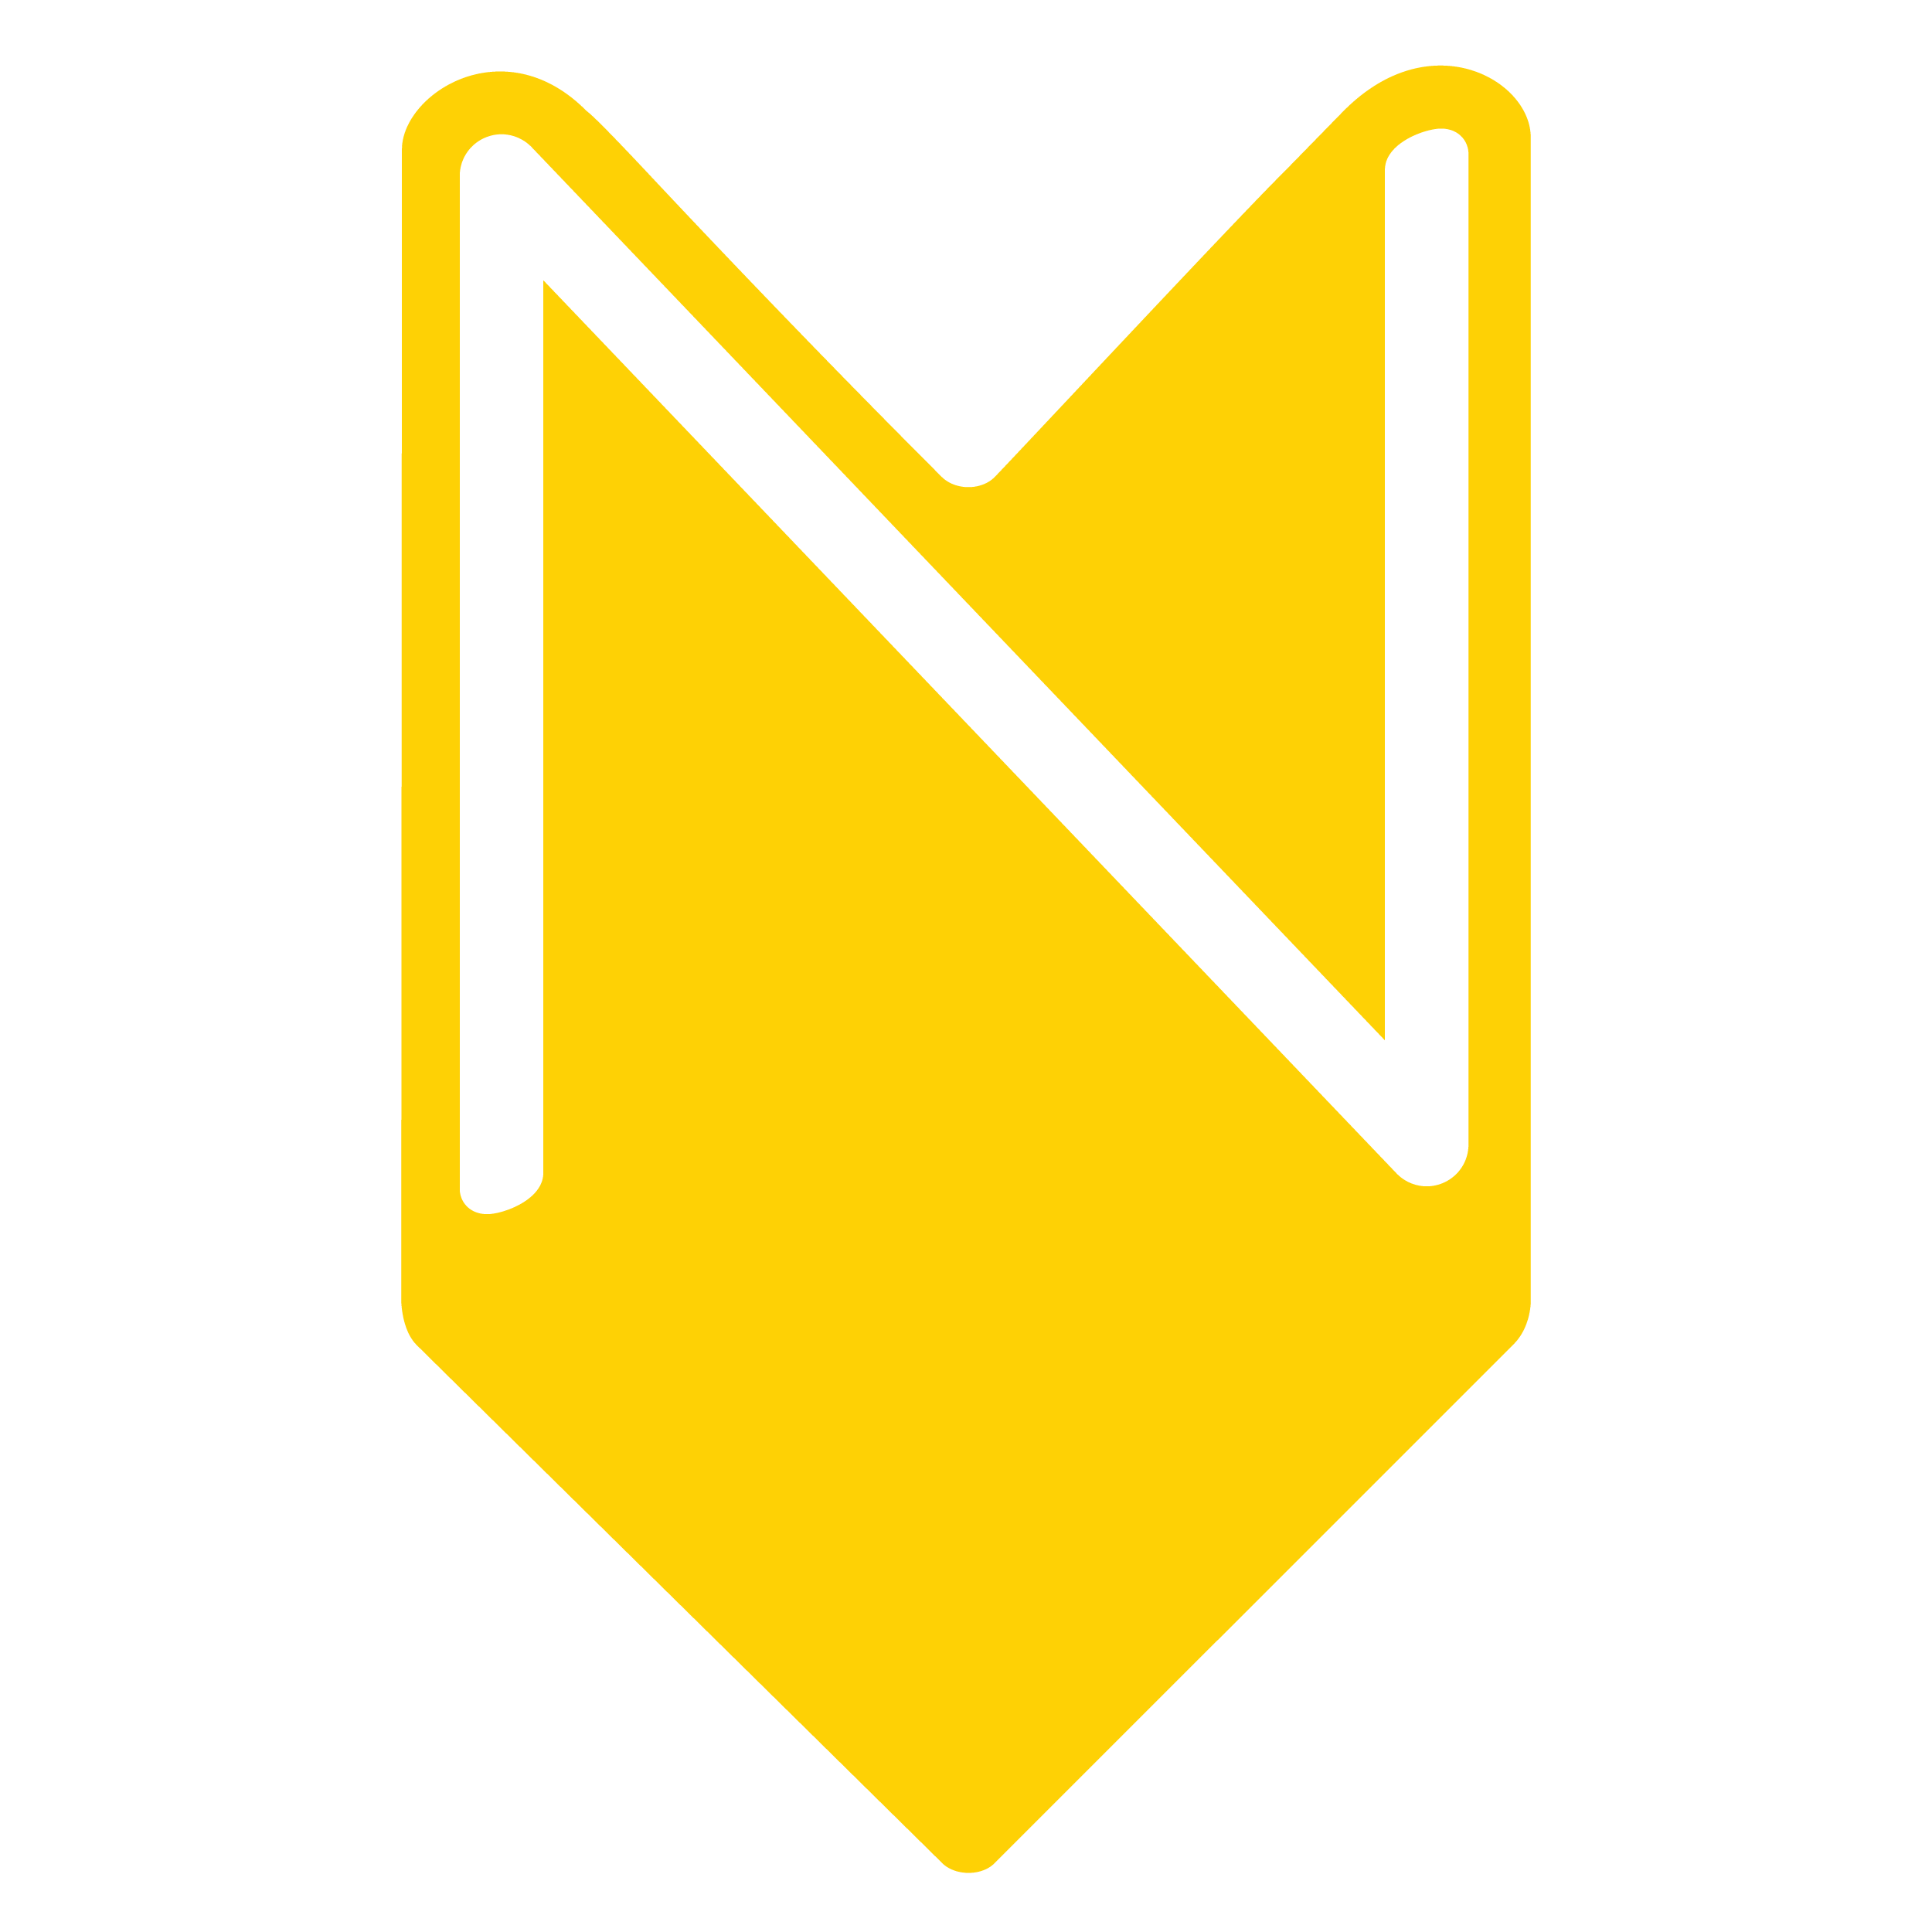 The Nearstory logo is a yellow uppercase 'N' within an elongated brown chevron. The chevron is pointed down like an arrow to symbolize a location point in which a story can be heard.